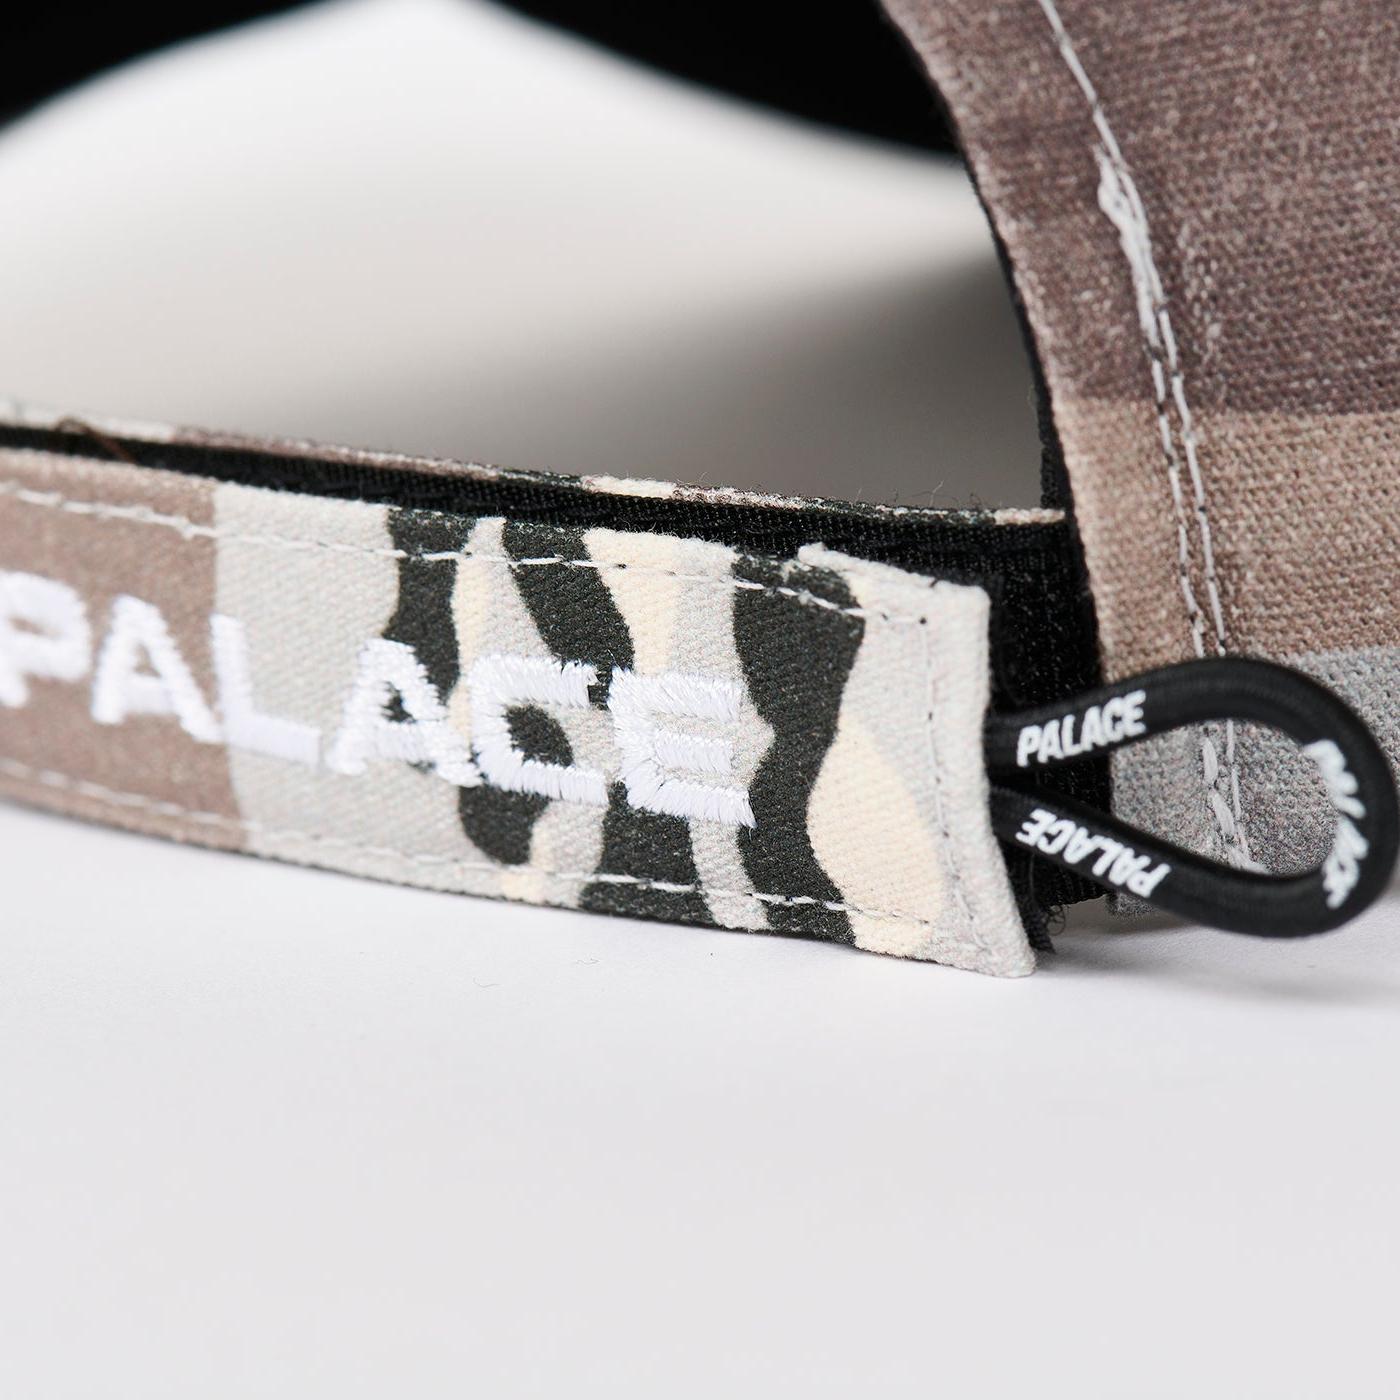 Thumbnail OM 6-PANEL GREY CAMO one color